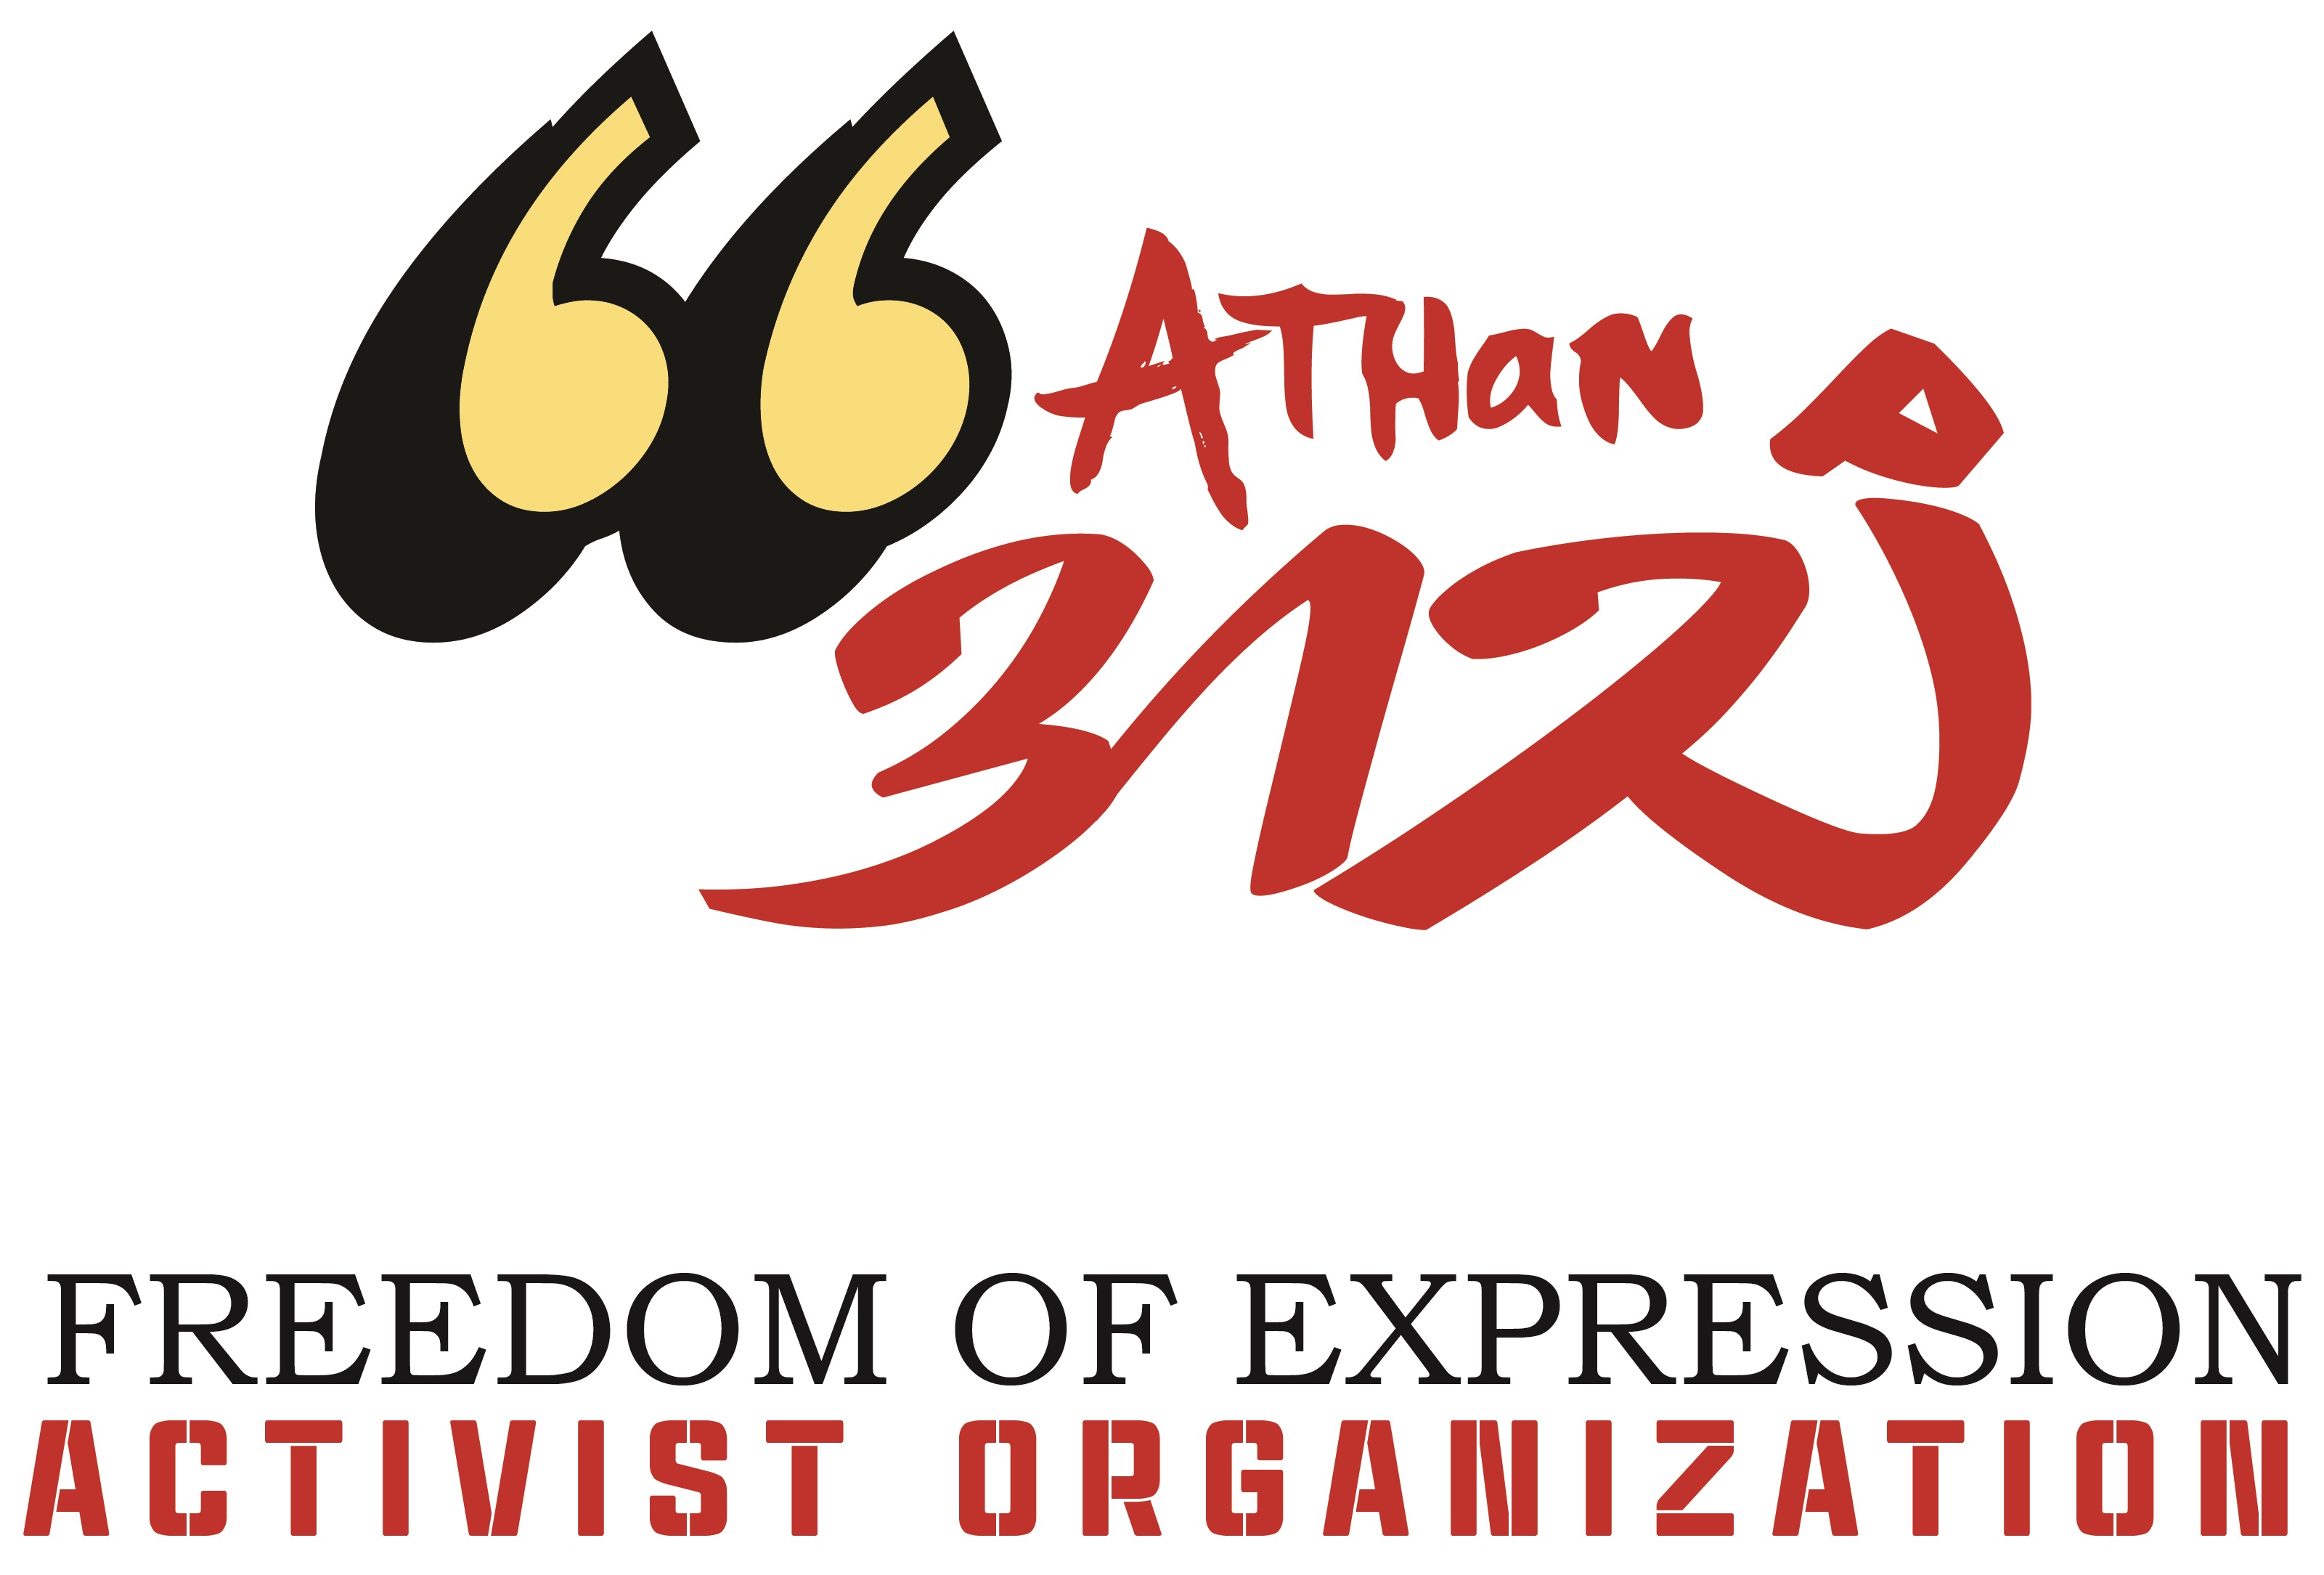 Athan - Freedom of Expression Activist Organization